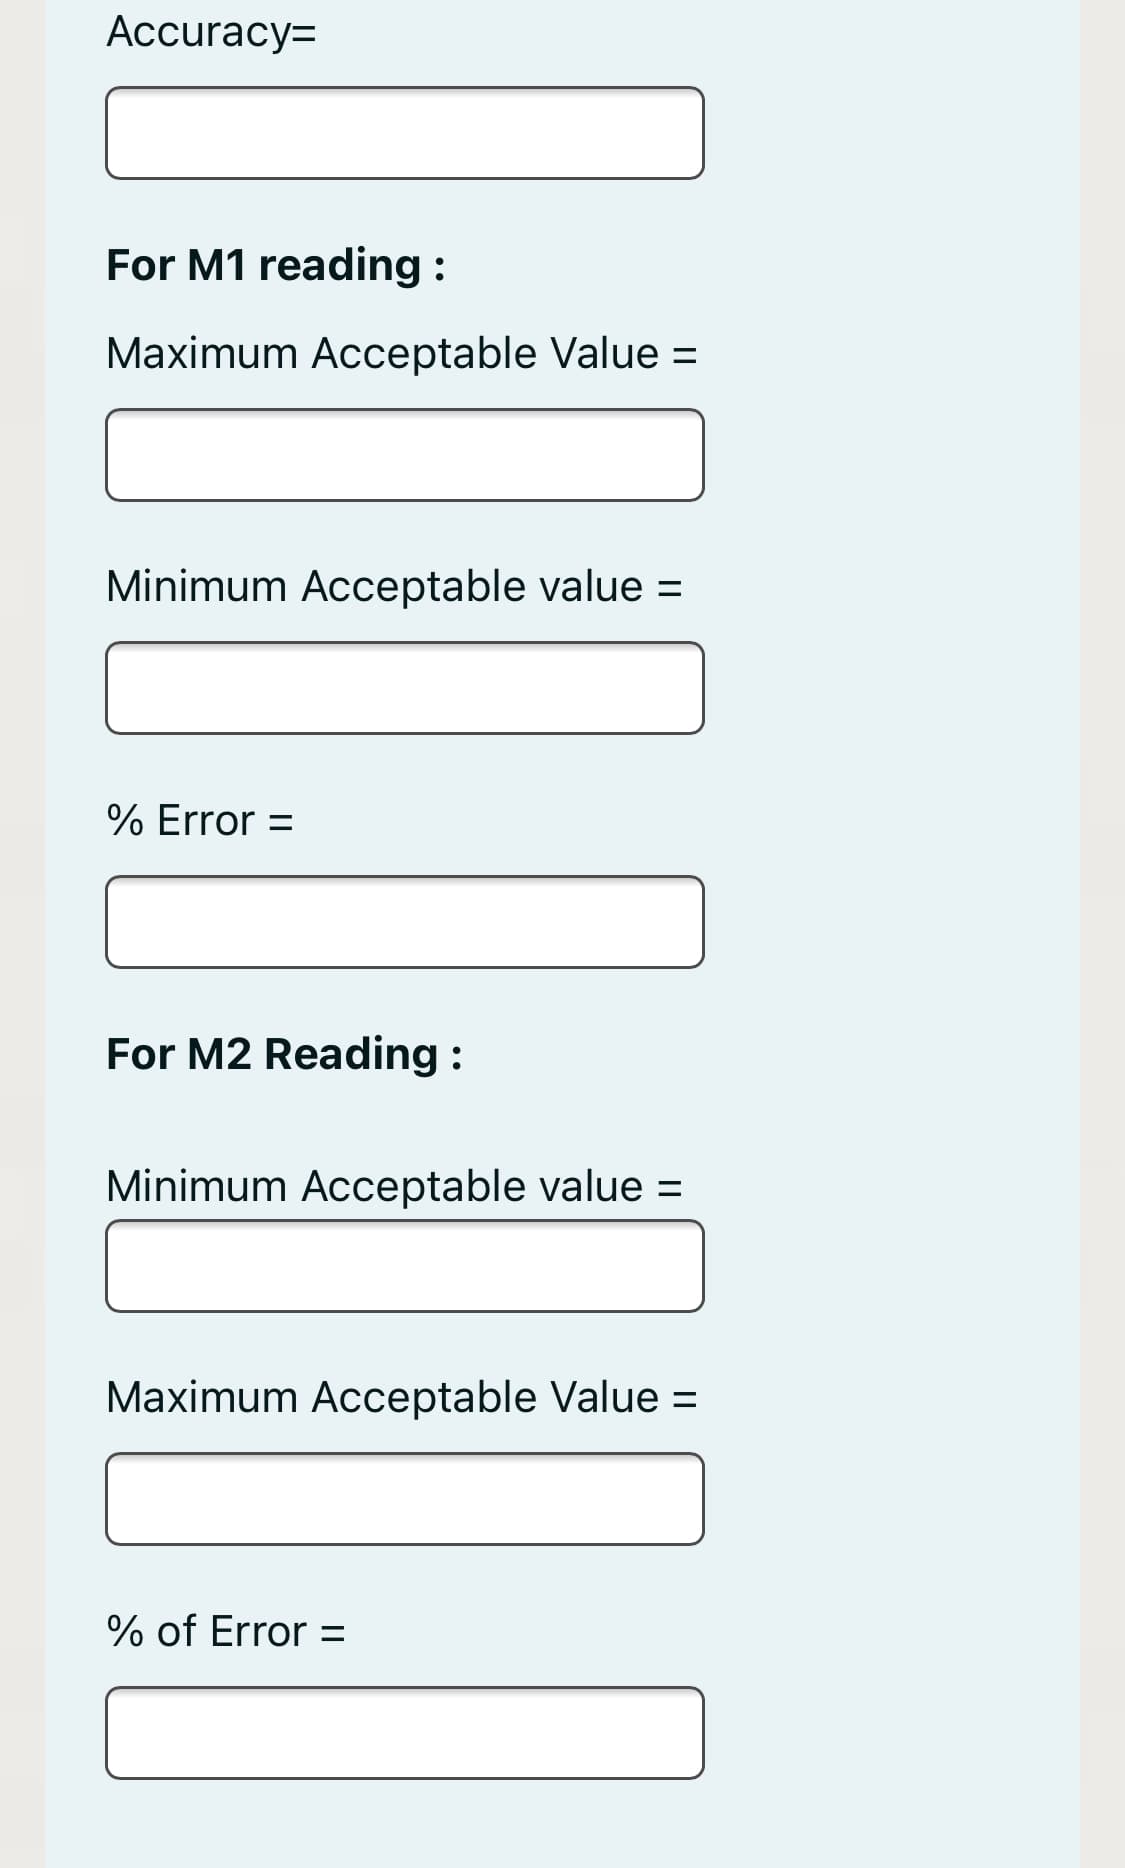 Аccuracy-
For M1 reading :
Maximum Acceptable Value =
Minimum Acceptable value =
% Error =
For M2 Reading:
Minimum Acceptable value =
Maximum Acceptable Value =
% of Error =
